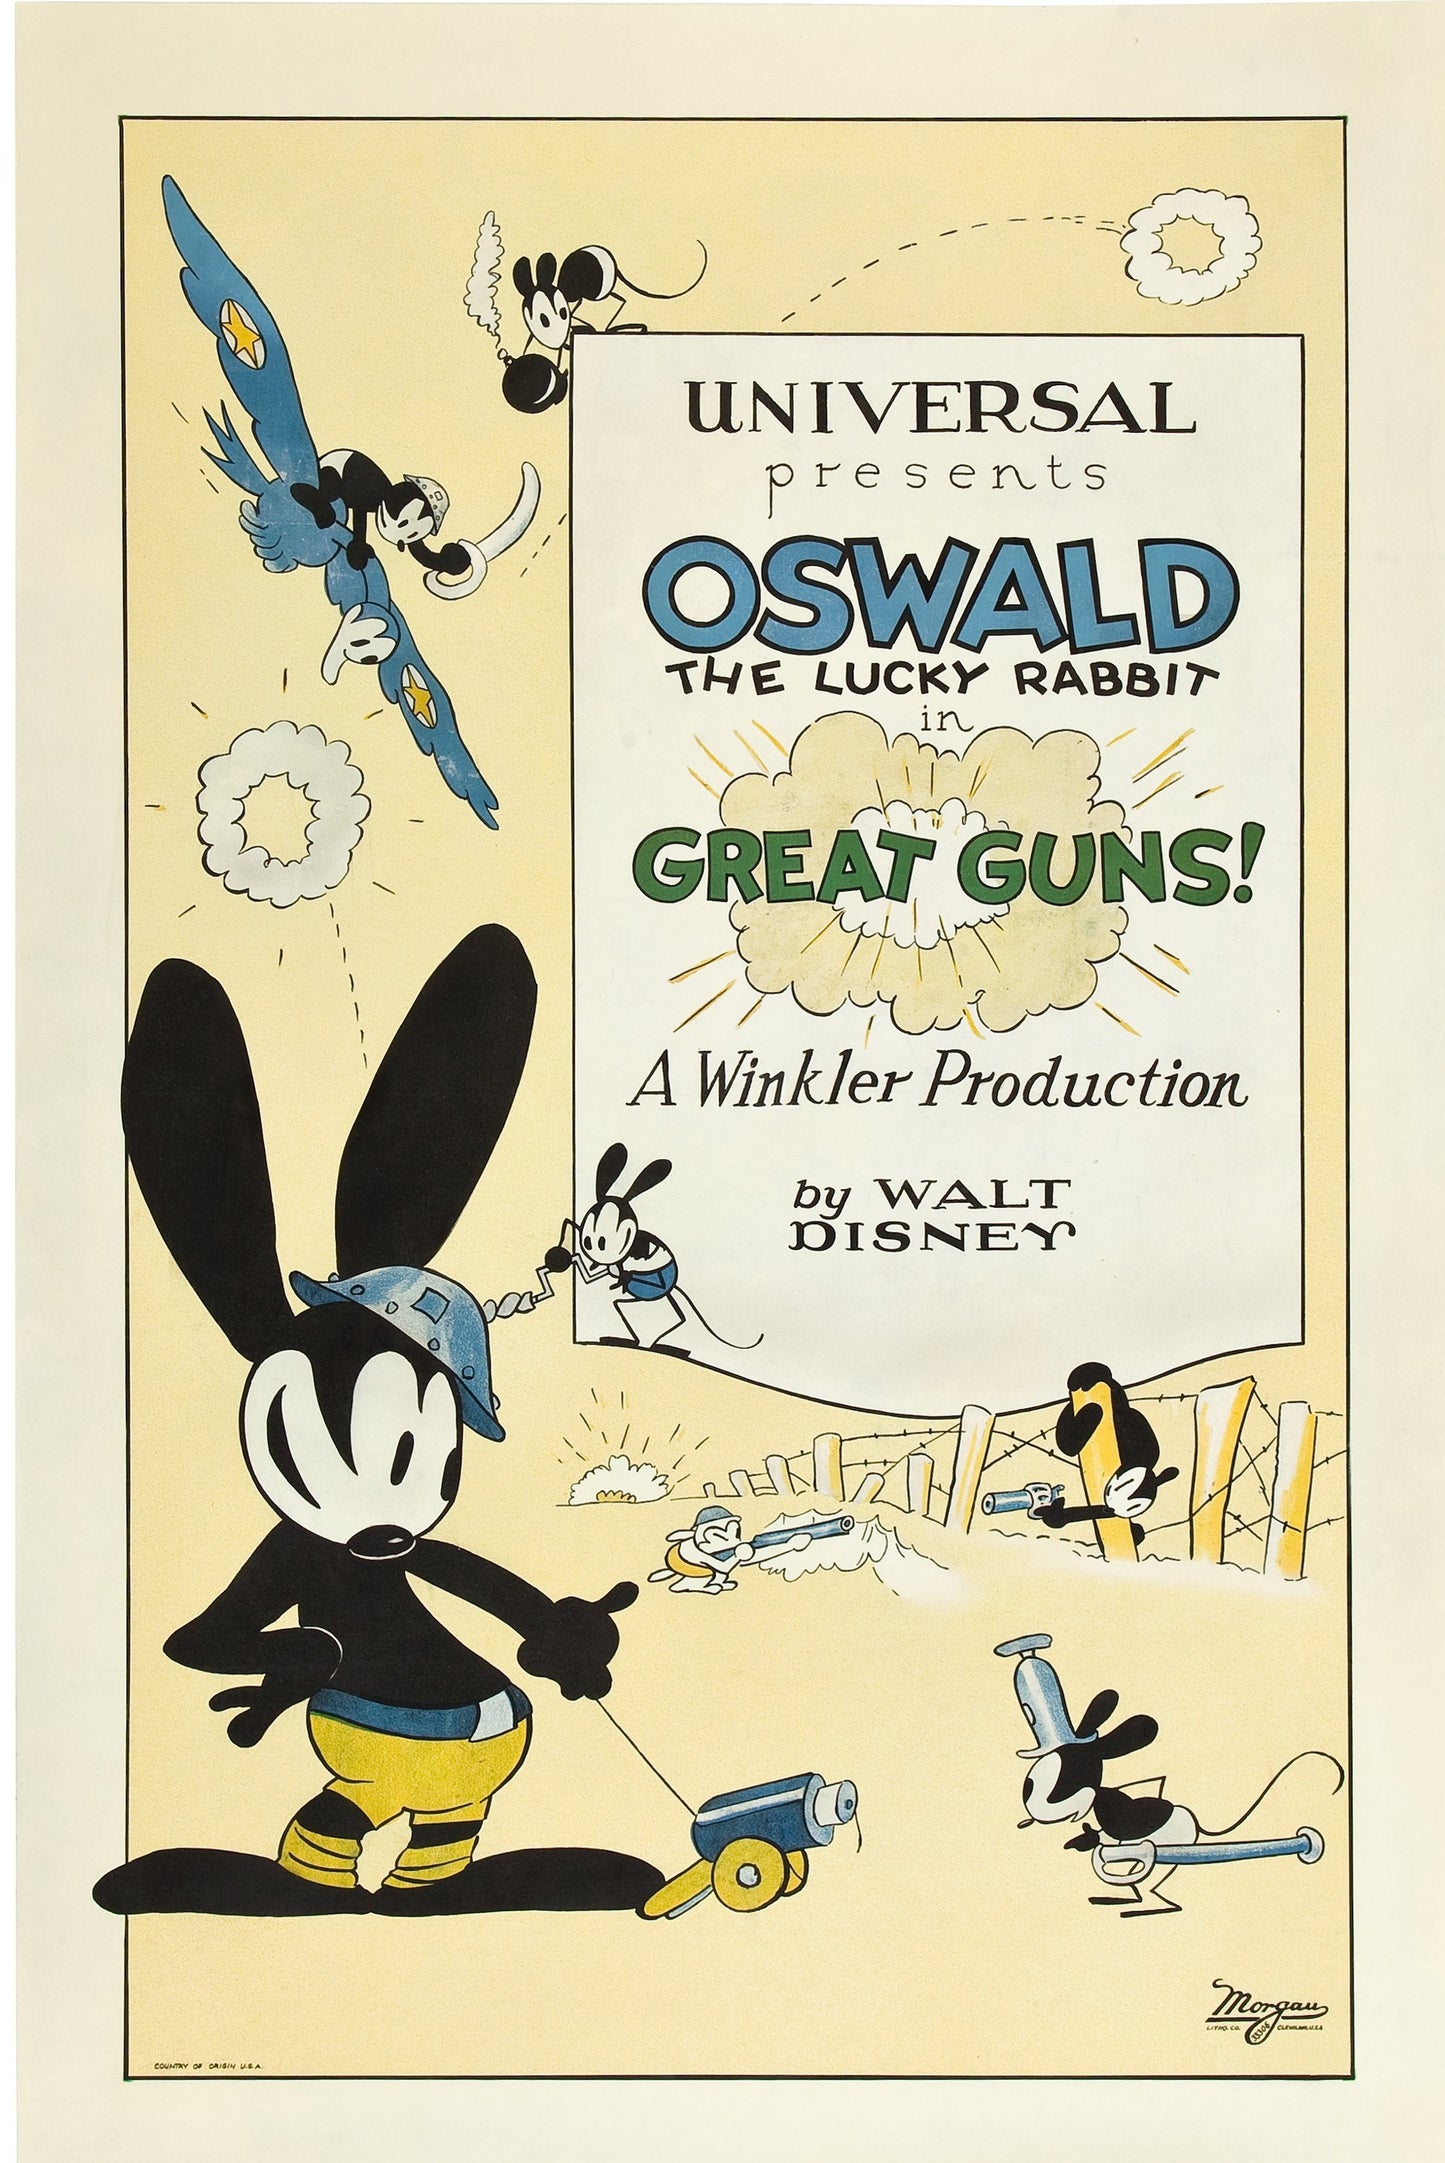 Oswald the lucky rabbit poster "Great Guns" (1920s) | Walt Disney Old Cartoon Movies Posters, Prints, & Visual Artwork The Trumpet Shop Vintage Prints   